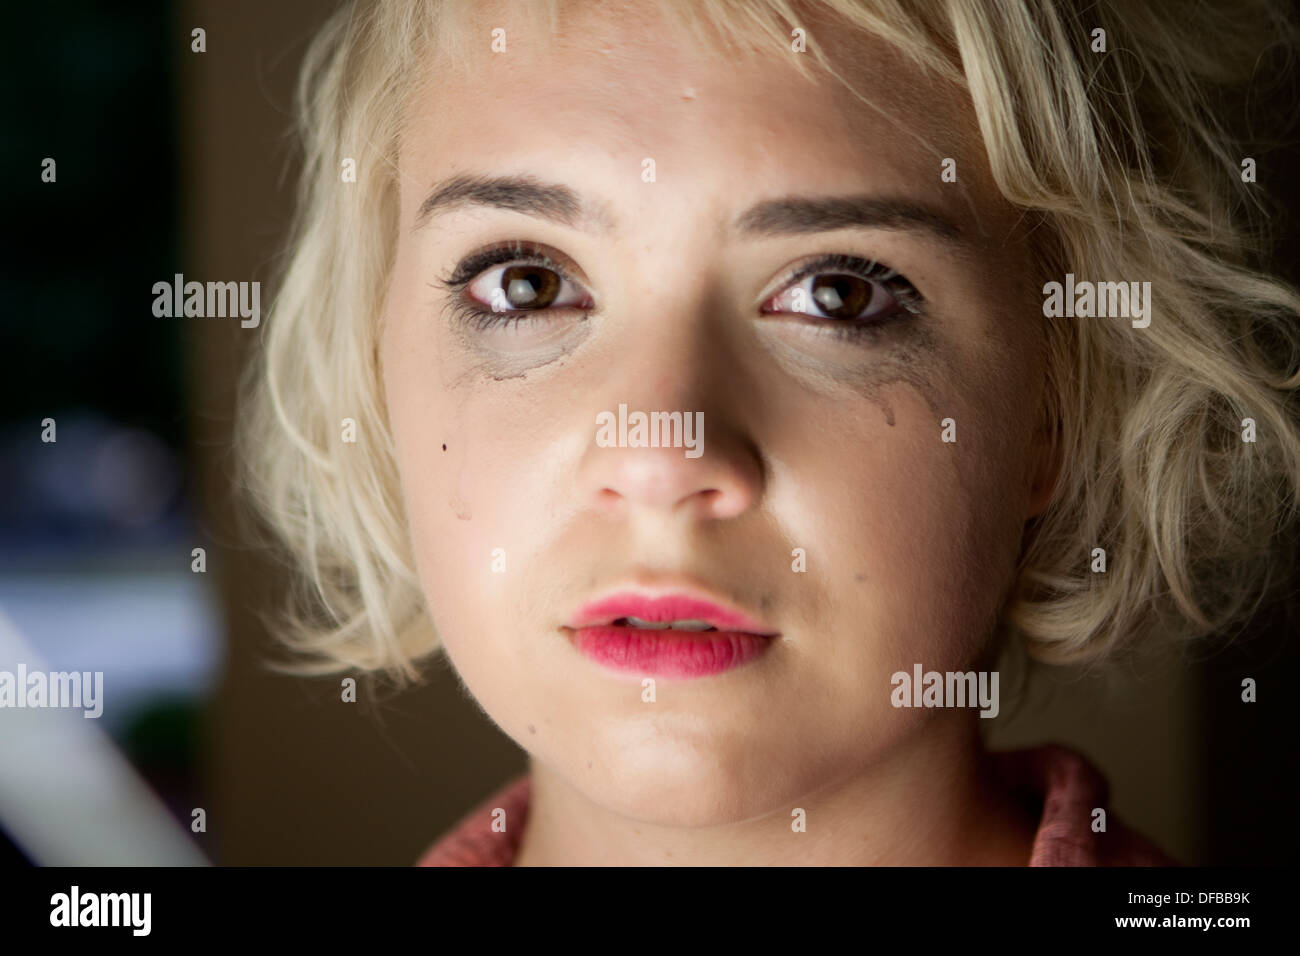 !9 year old blond female face closeup with tears and runny makeup visibly in emotional distress, sad, looking straight into you Stock Photo